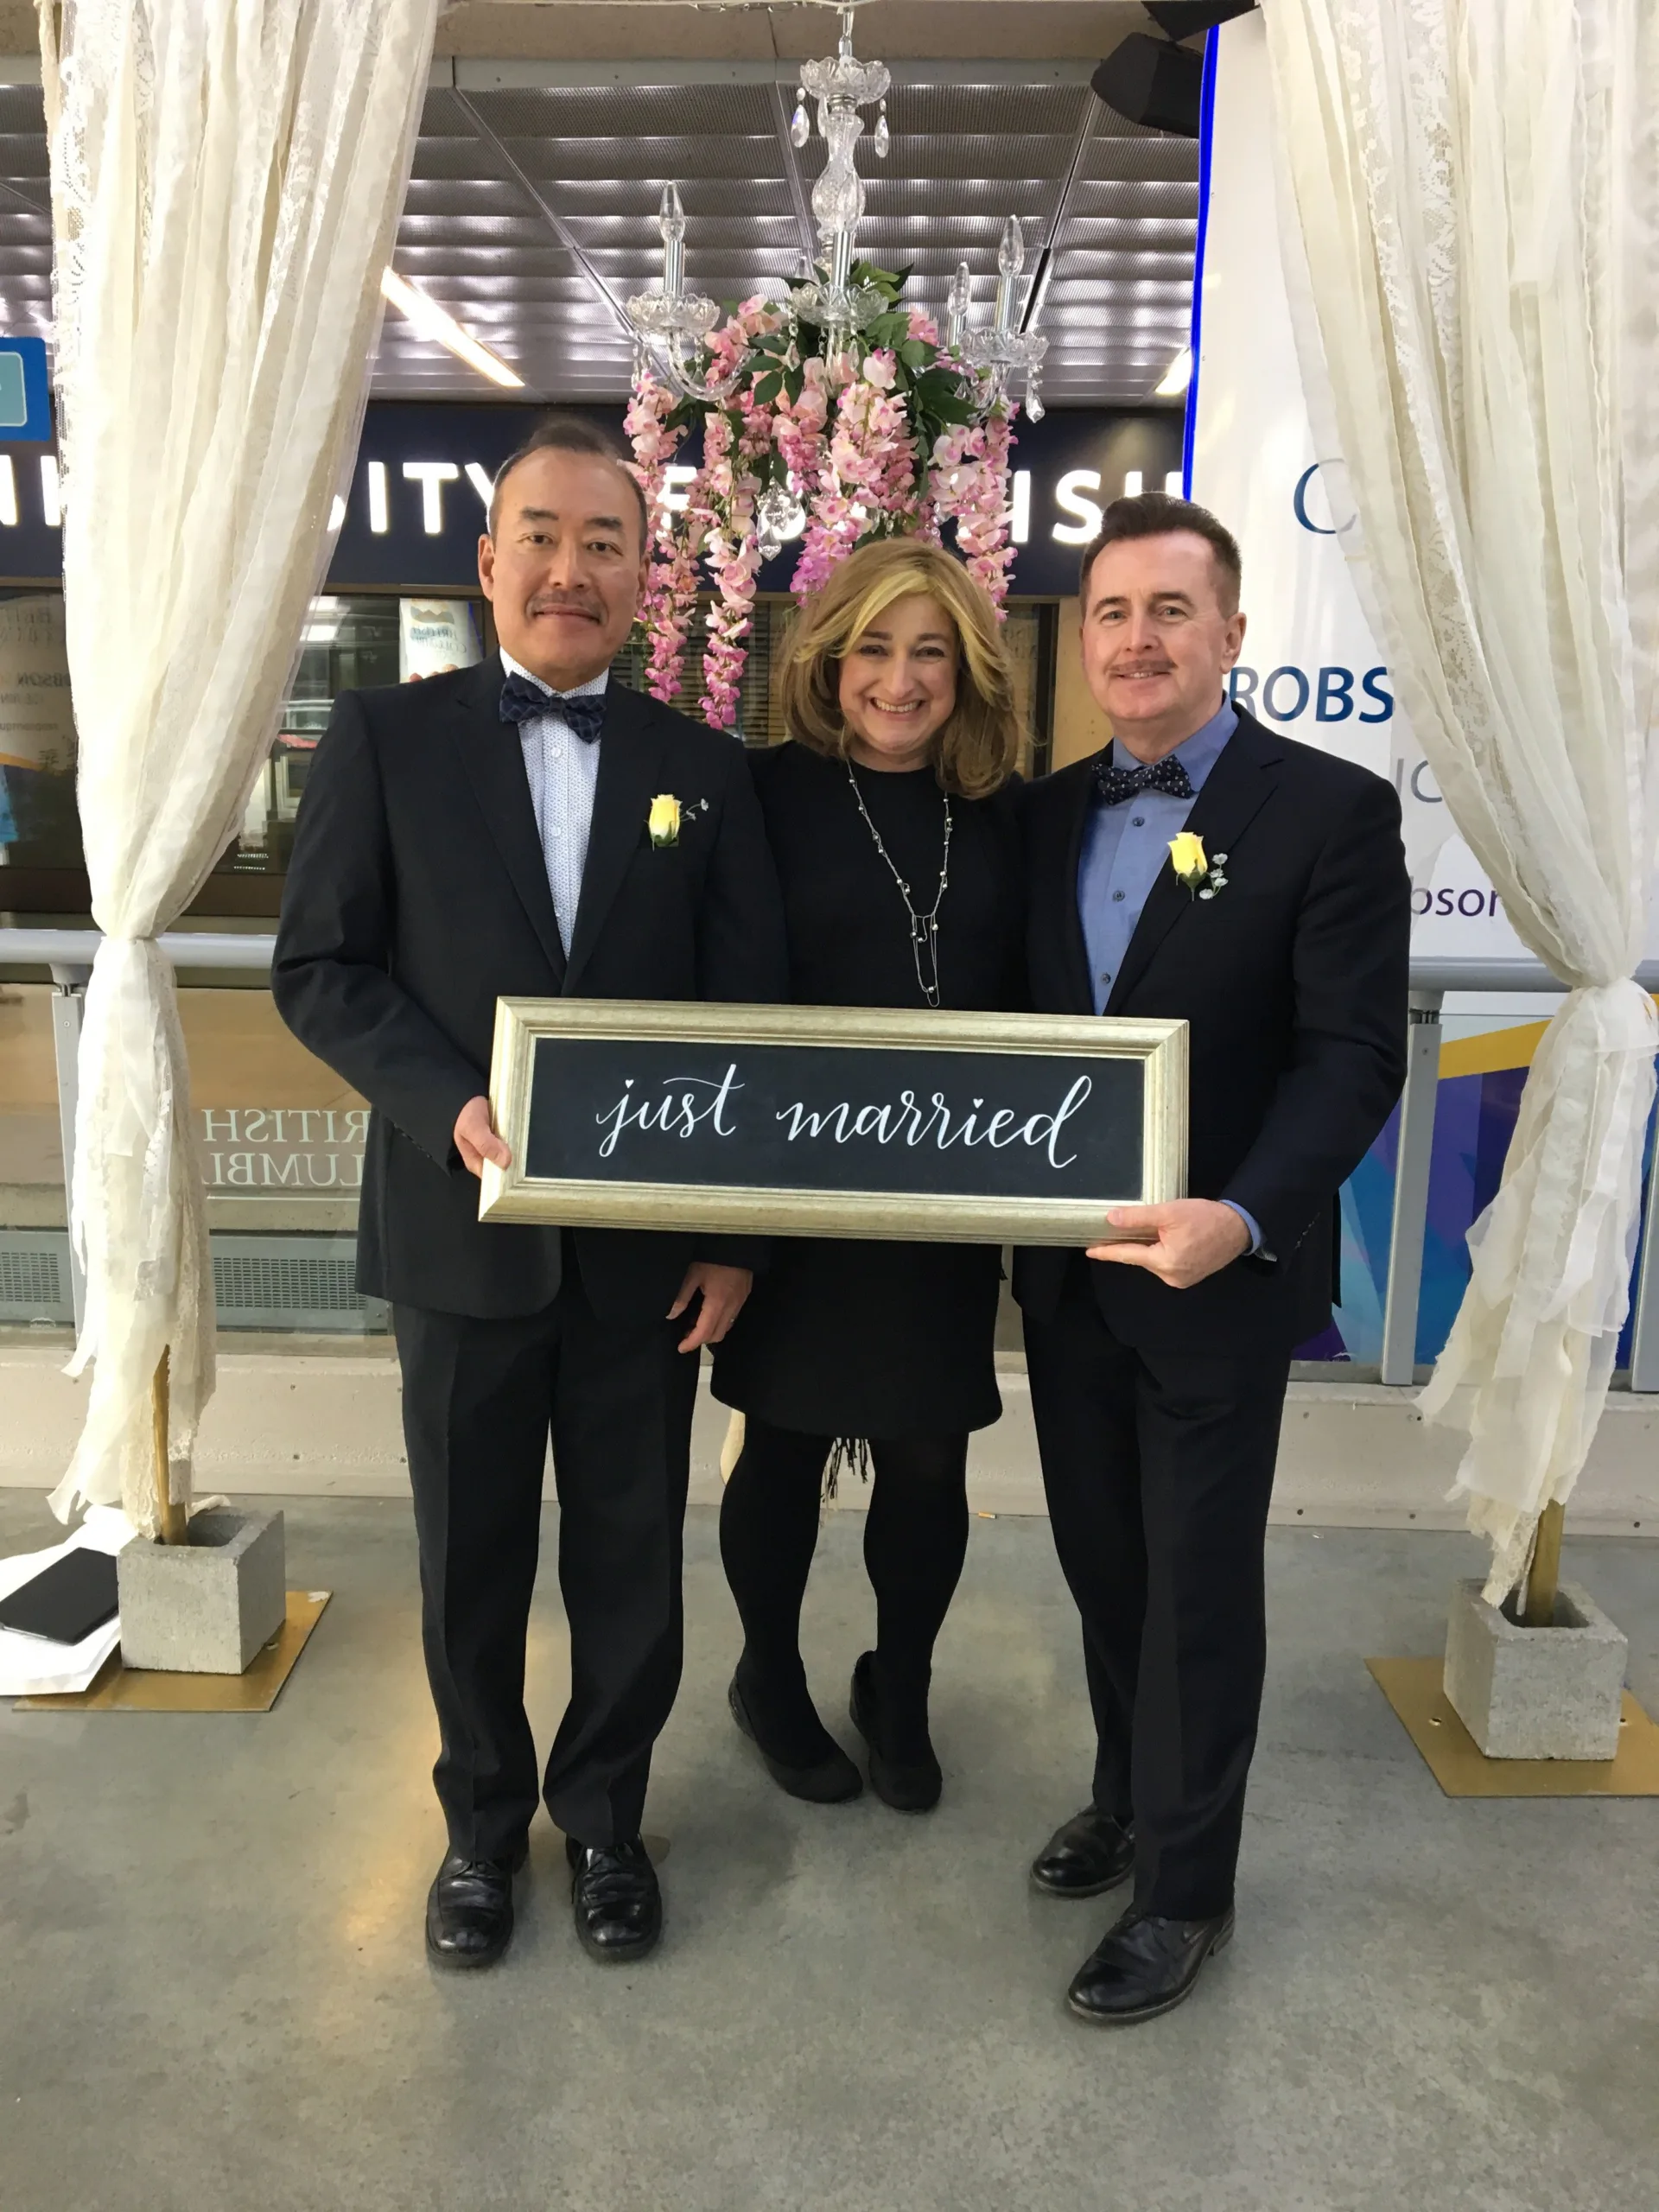 Newlyweds Angus & Daichan pose with Officiant Lauren and a sign that says "just married"